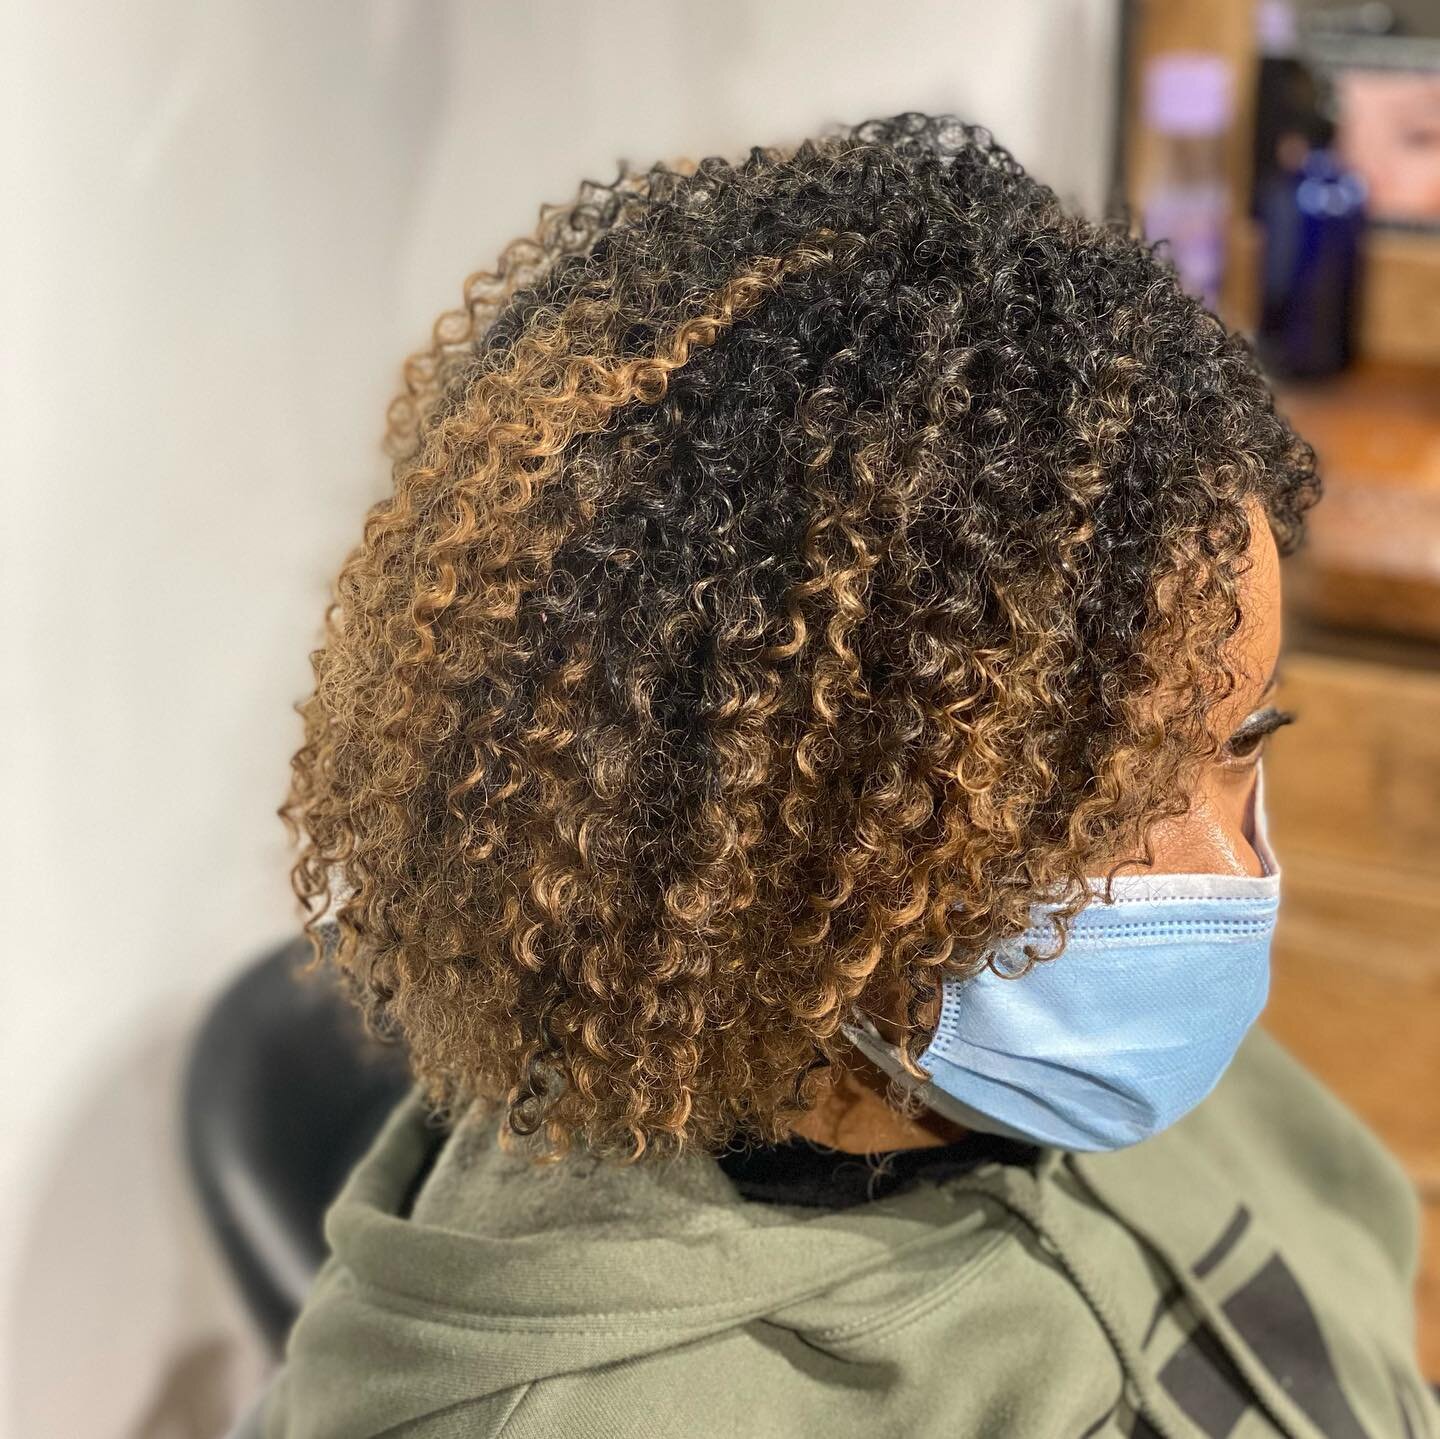 I love how natural this crochet style came out! 

#crochethairstyles #naturalhair #protectivestyles #stl #webstergroves #theblvdhairco #stlhairstylist #stlnaturalstylist